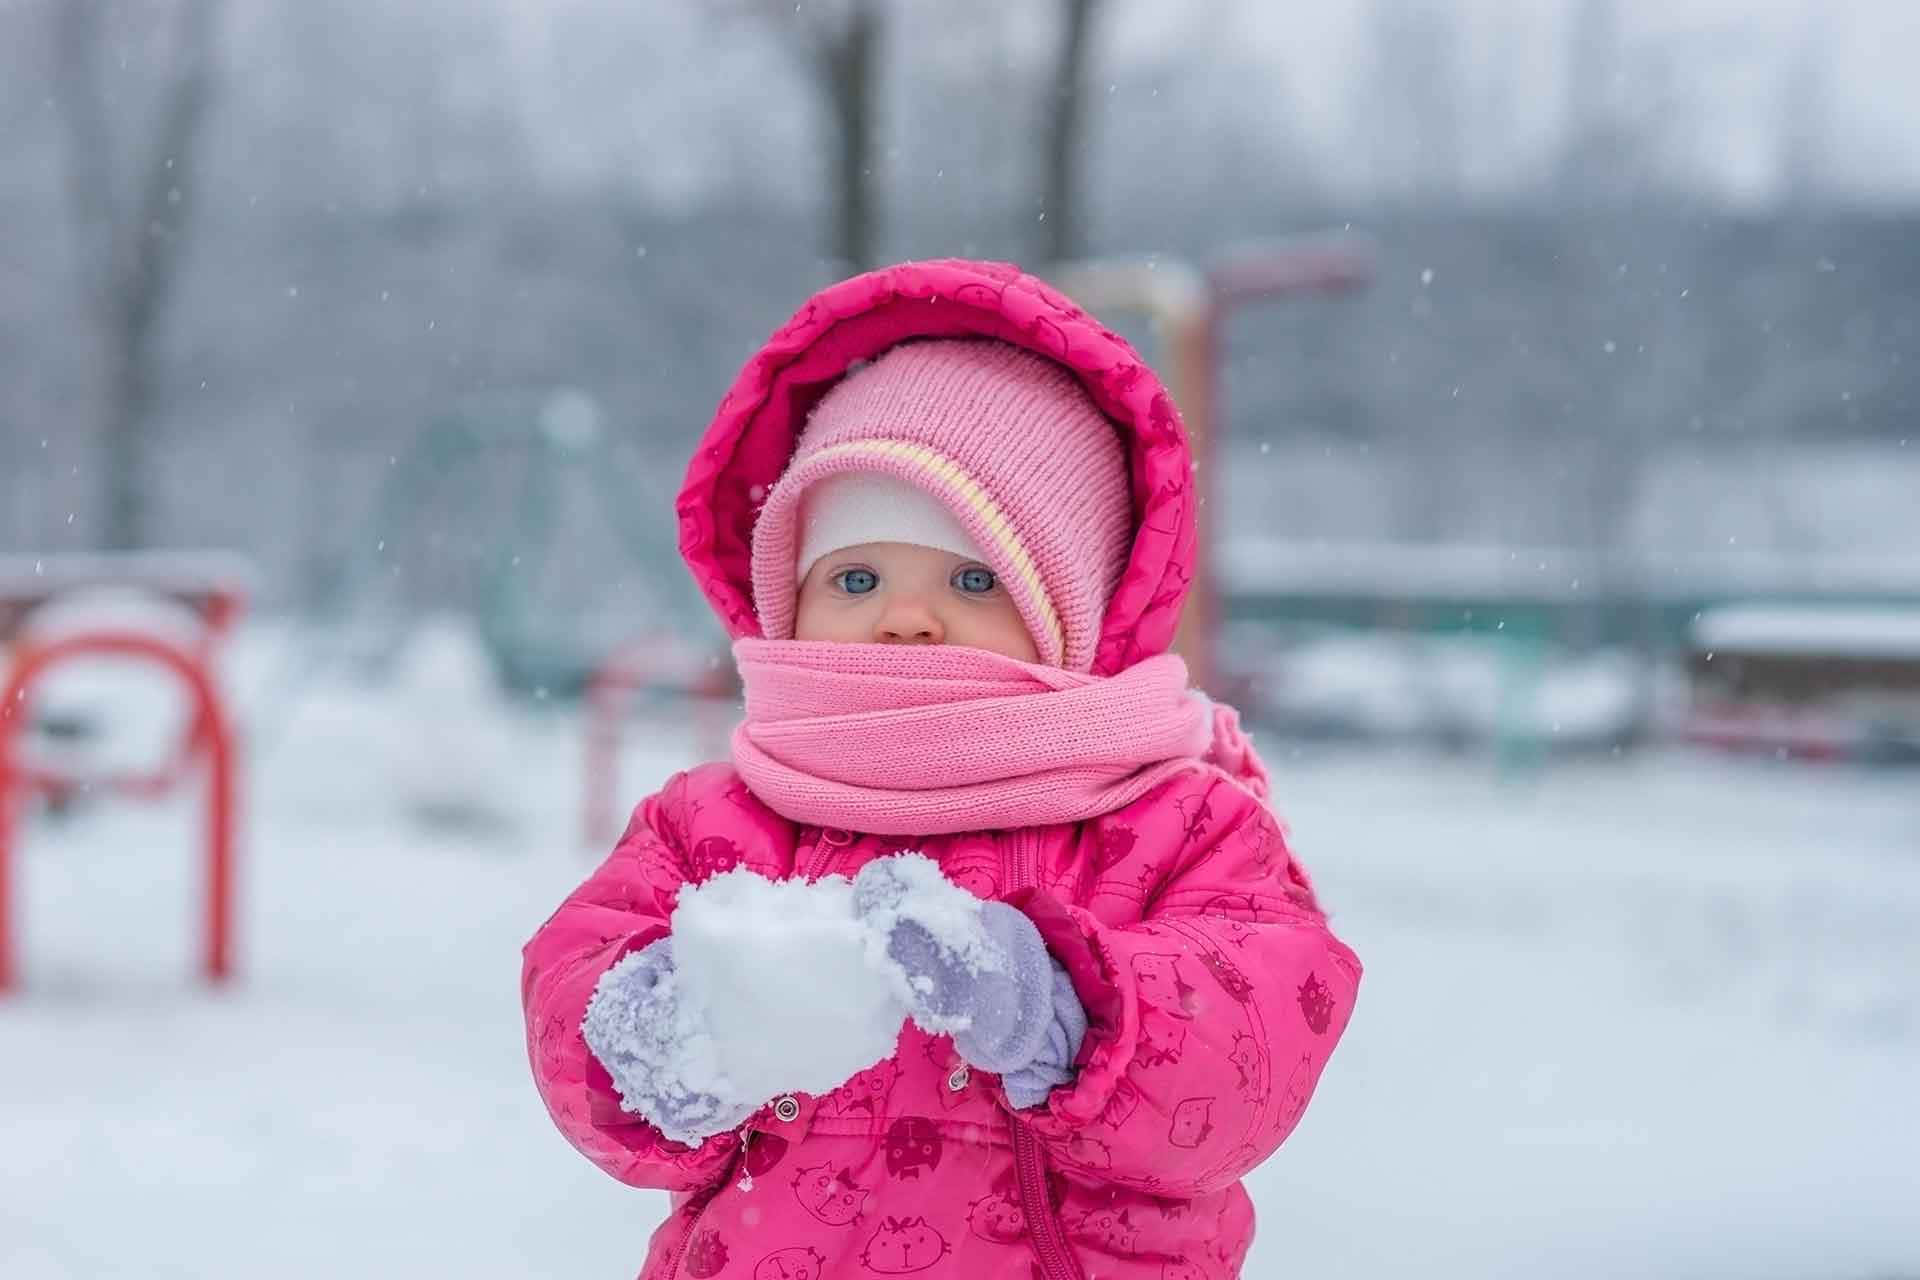 Shivering Baby In Snow [wallpaper] Wallpaper